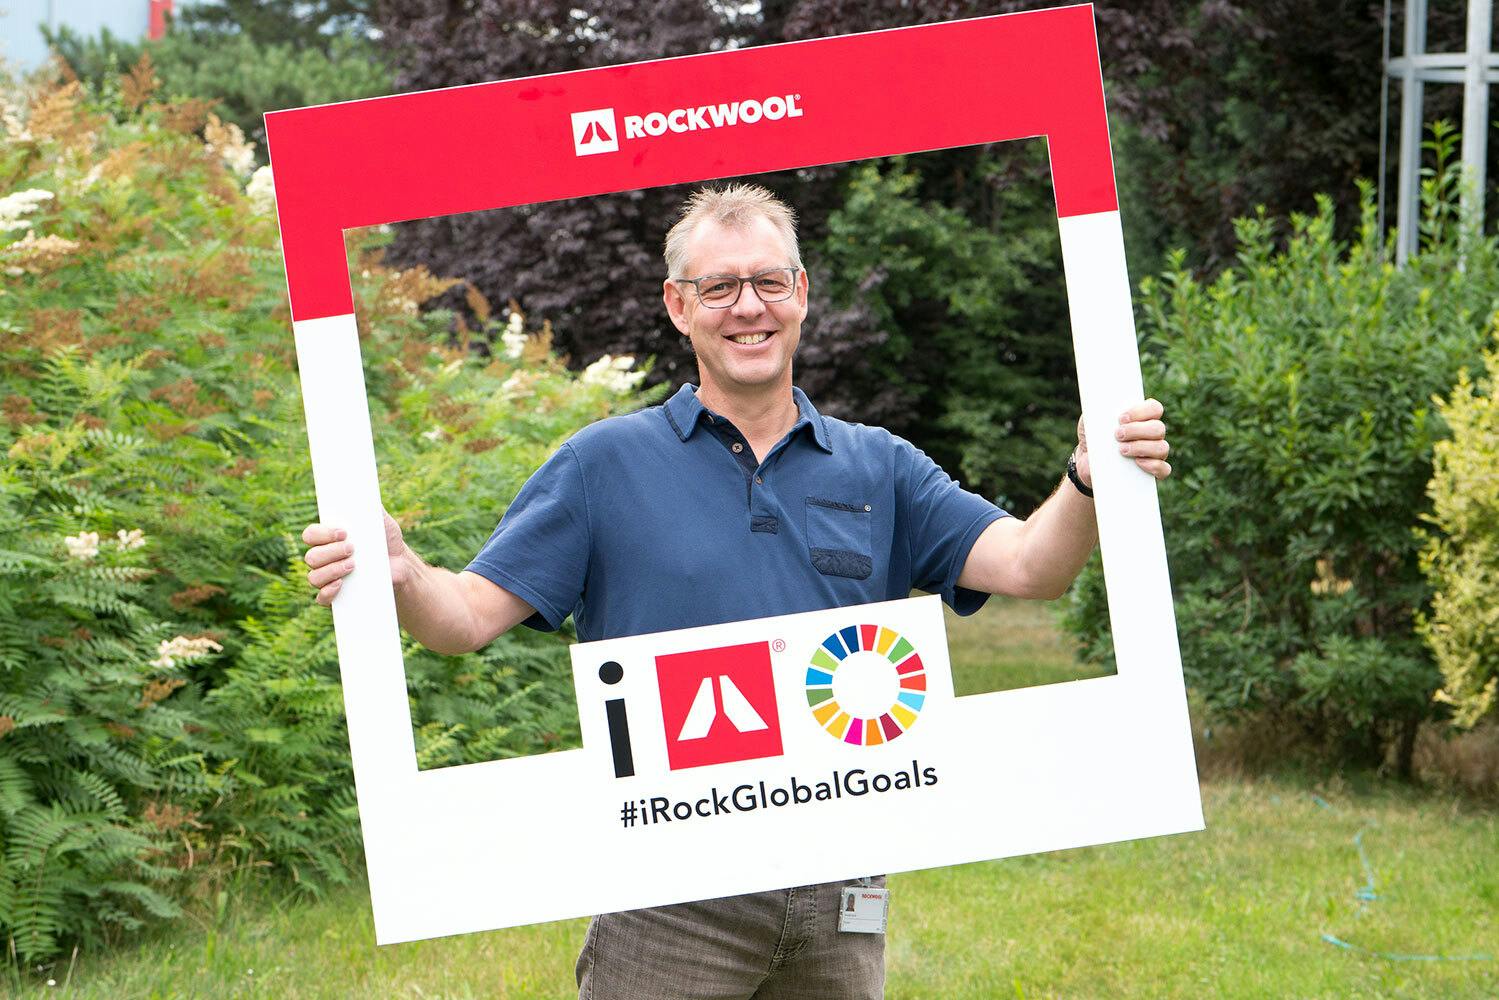 An employee promoting the #iRockGlobalGoals campaign. Keywords: Sustainable Development Goals, SGDs, Global Goals, Sustainability, Employees, Employee